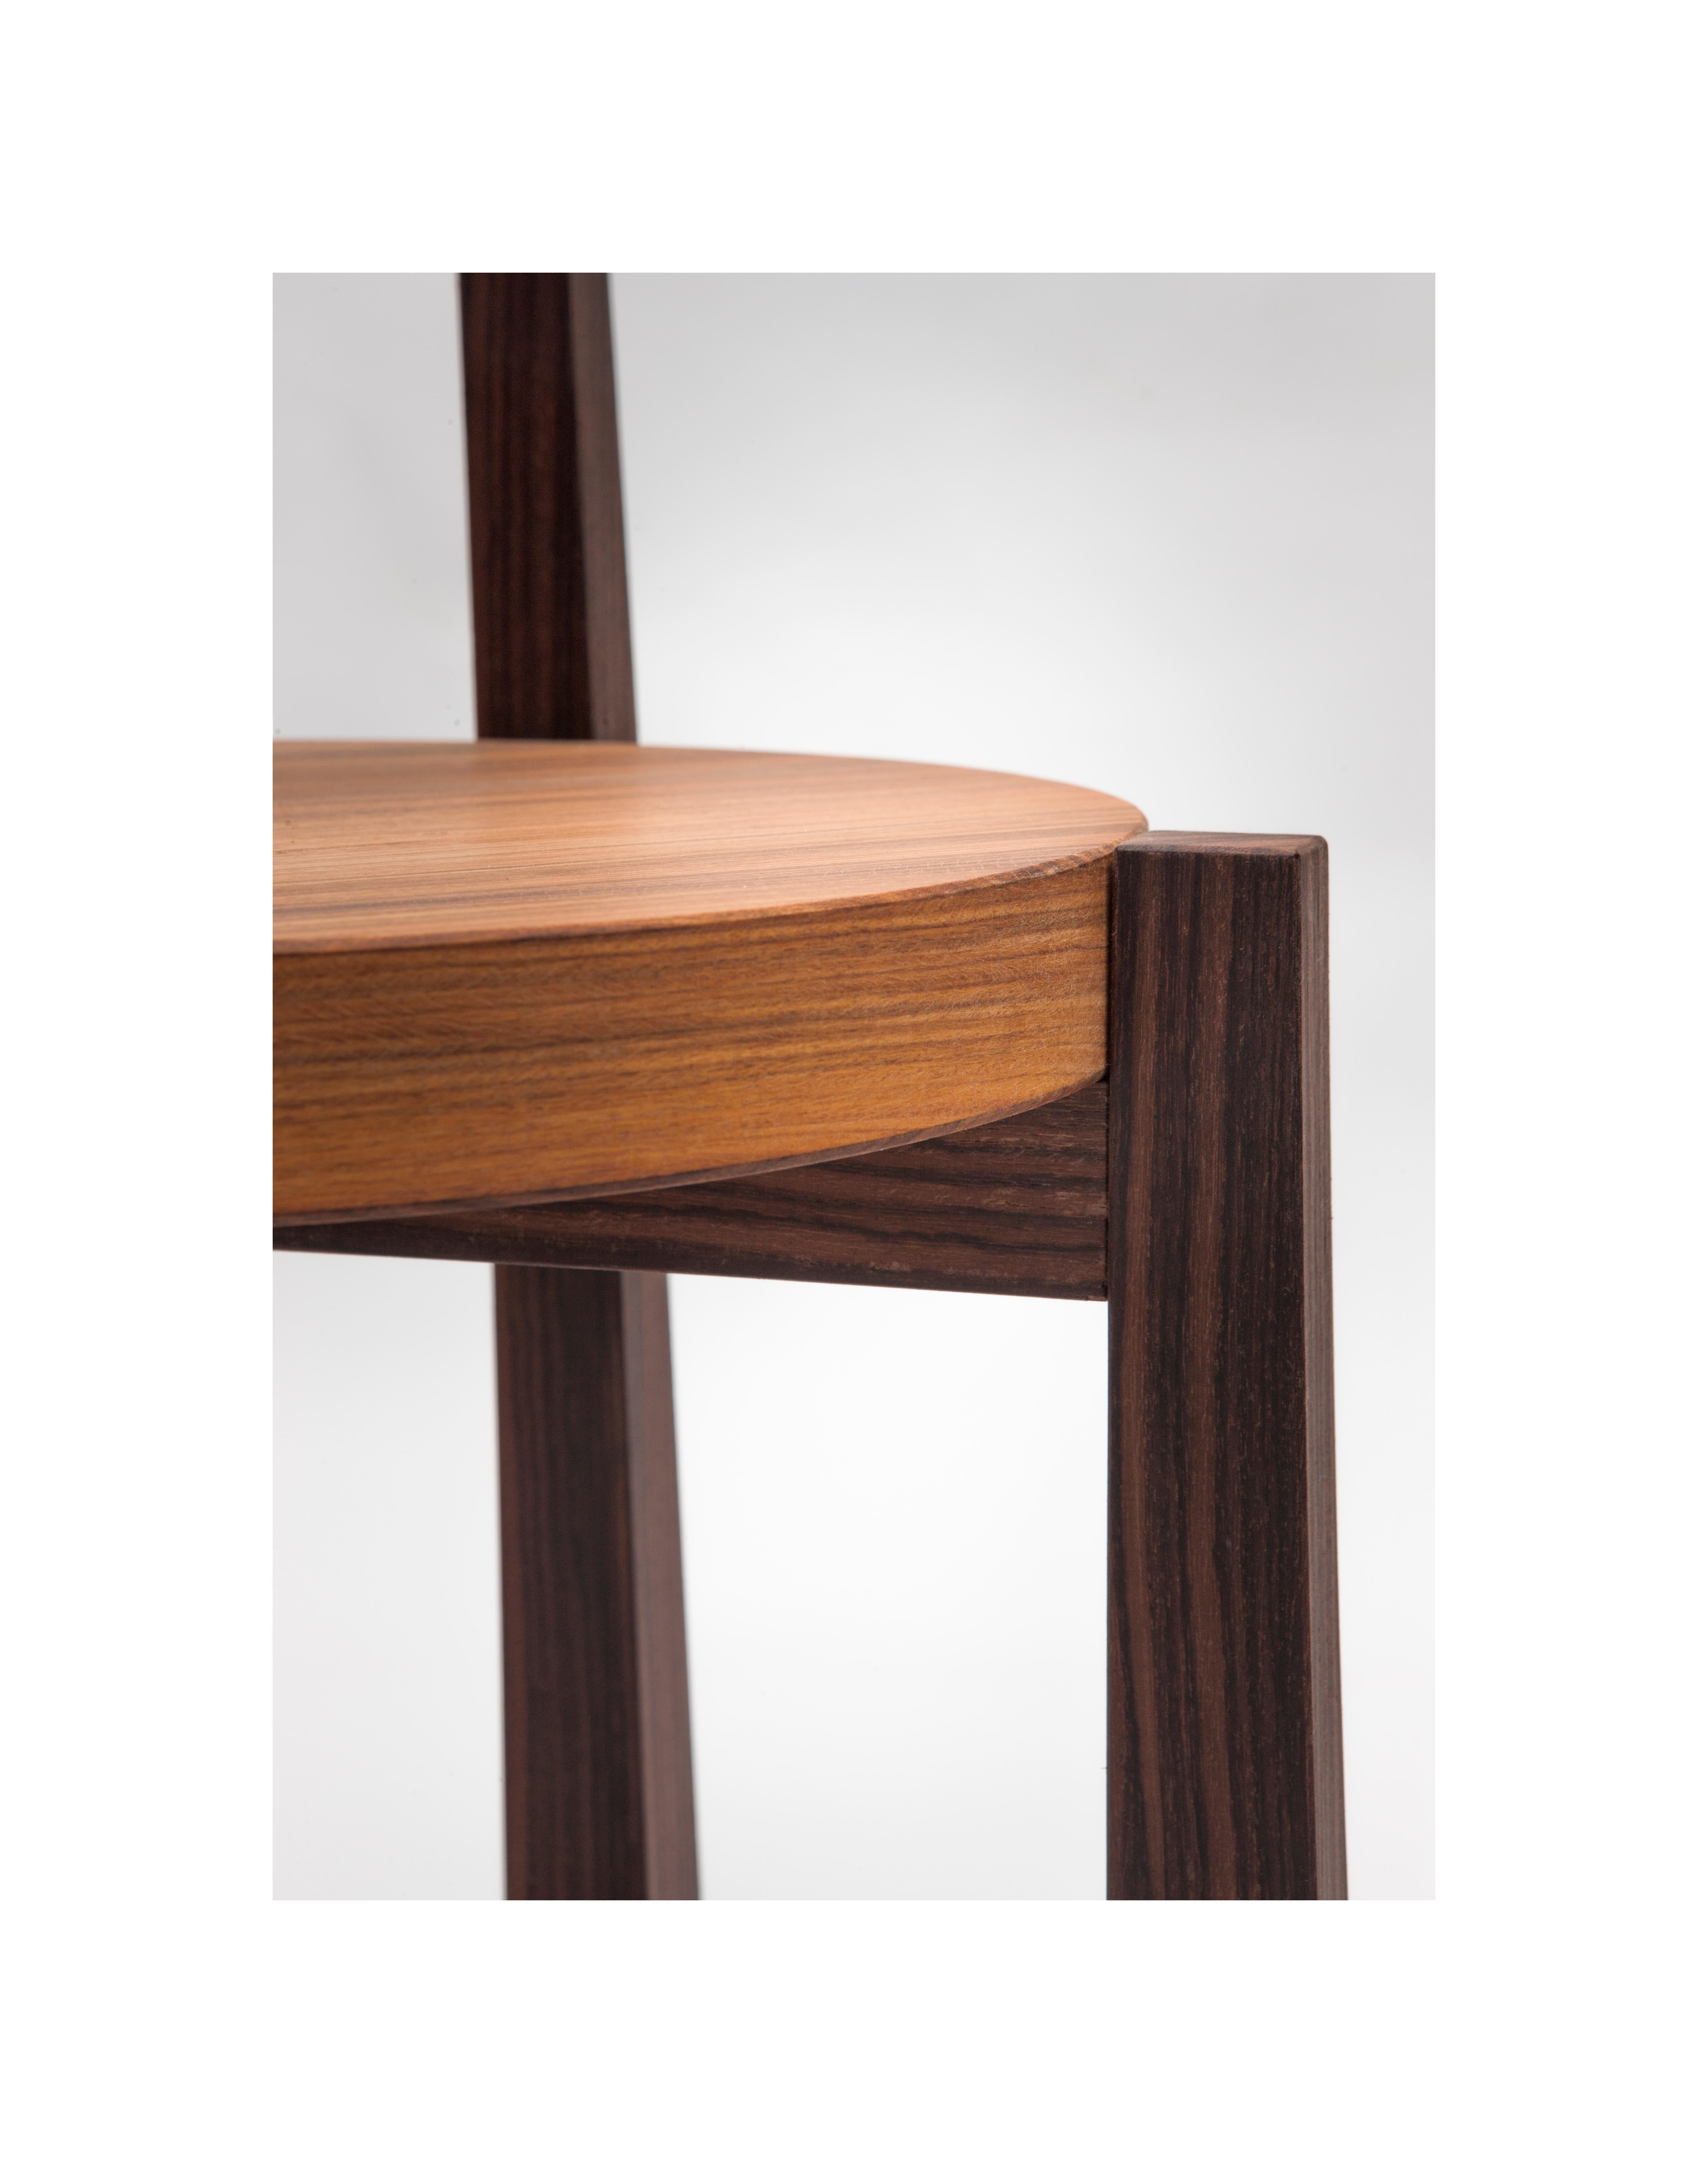 Contemporary Indian, Rosewood Sediolina Chair by Antonio Aricò for Delvis Unlimited For Sale